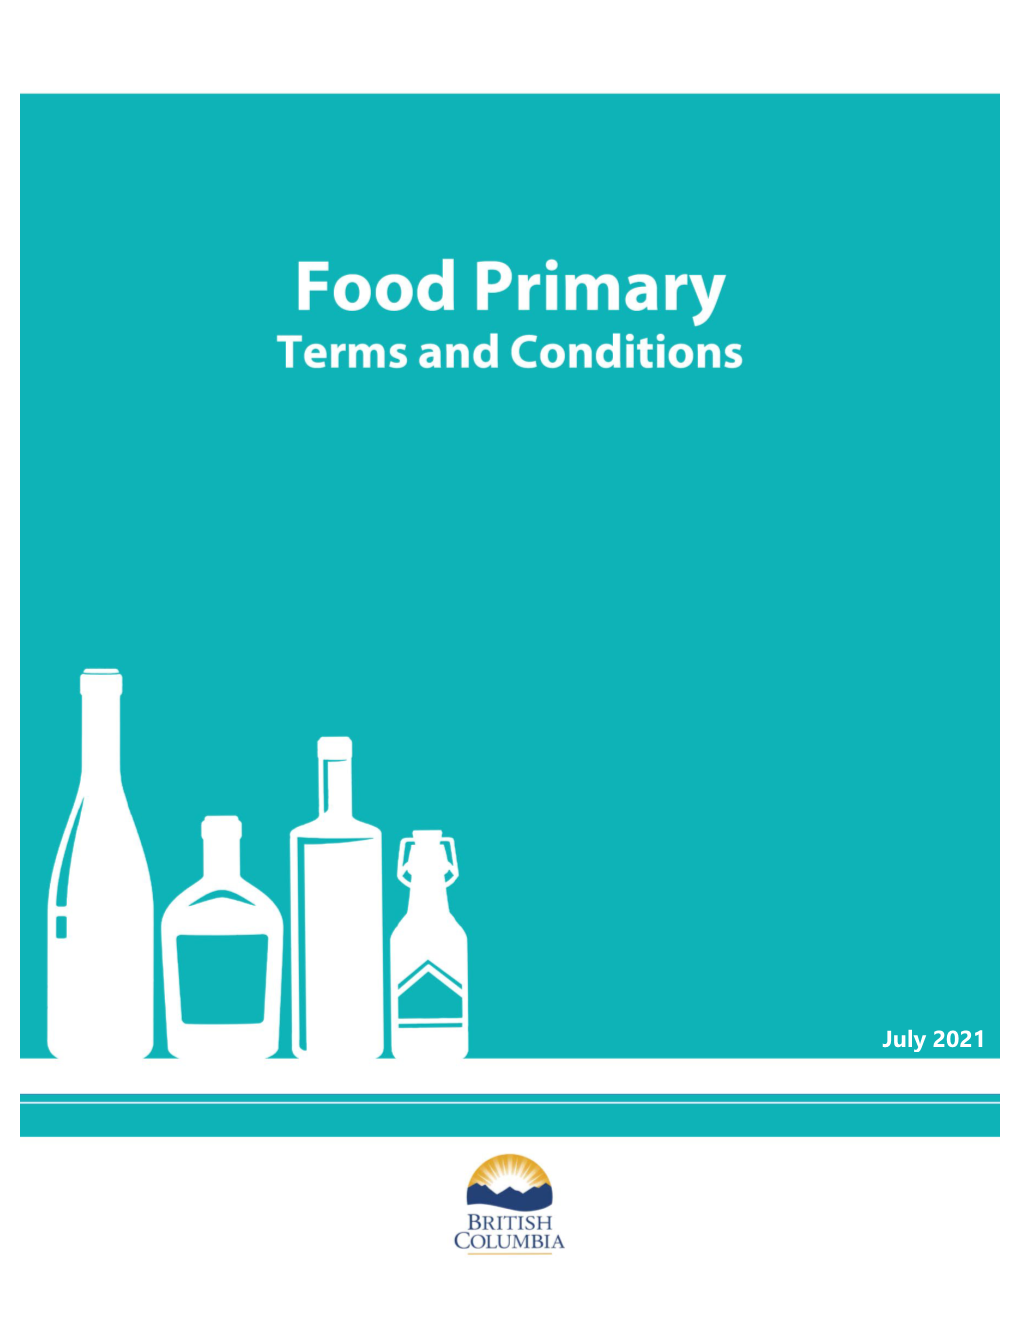 Food Primary Liquor Licence Terms & Conditions